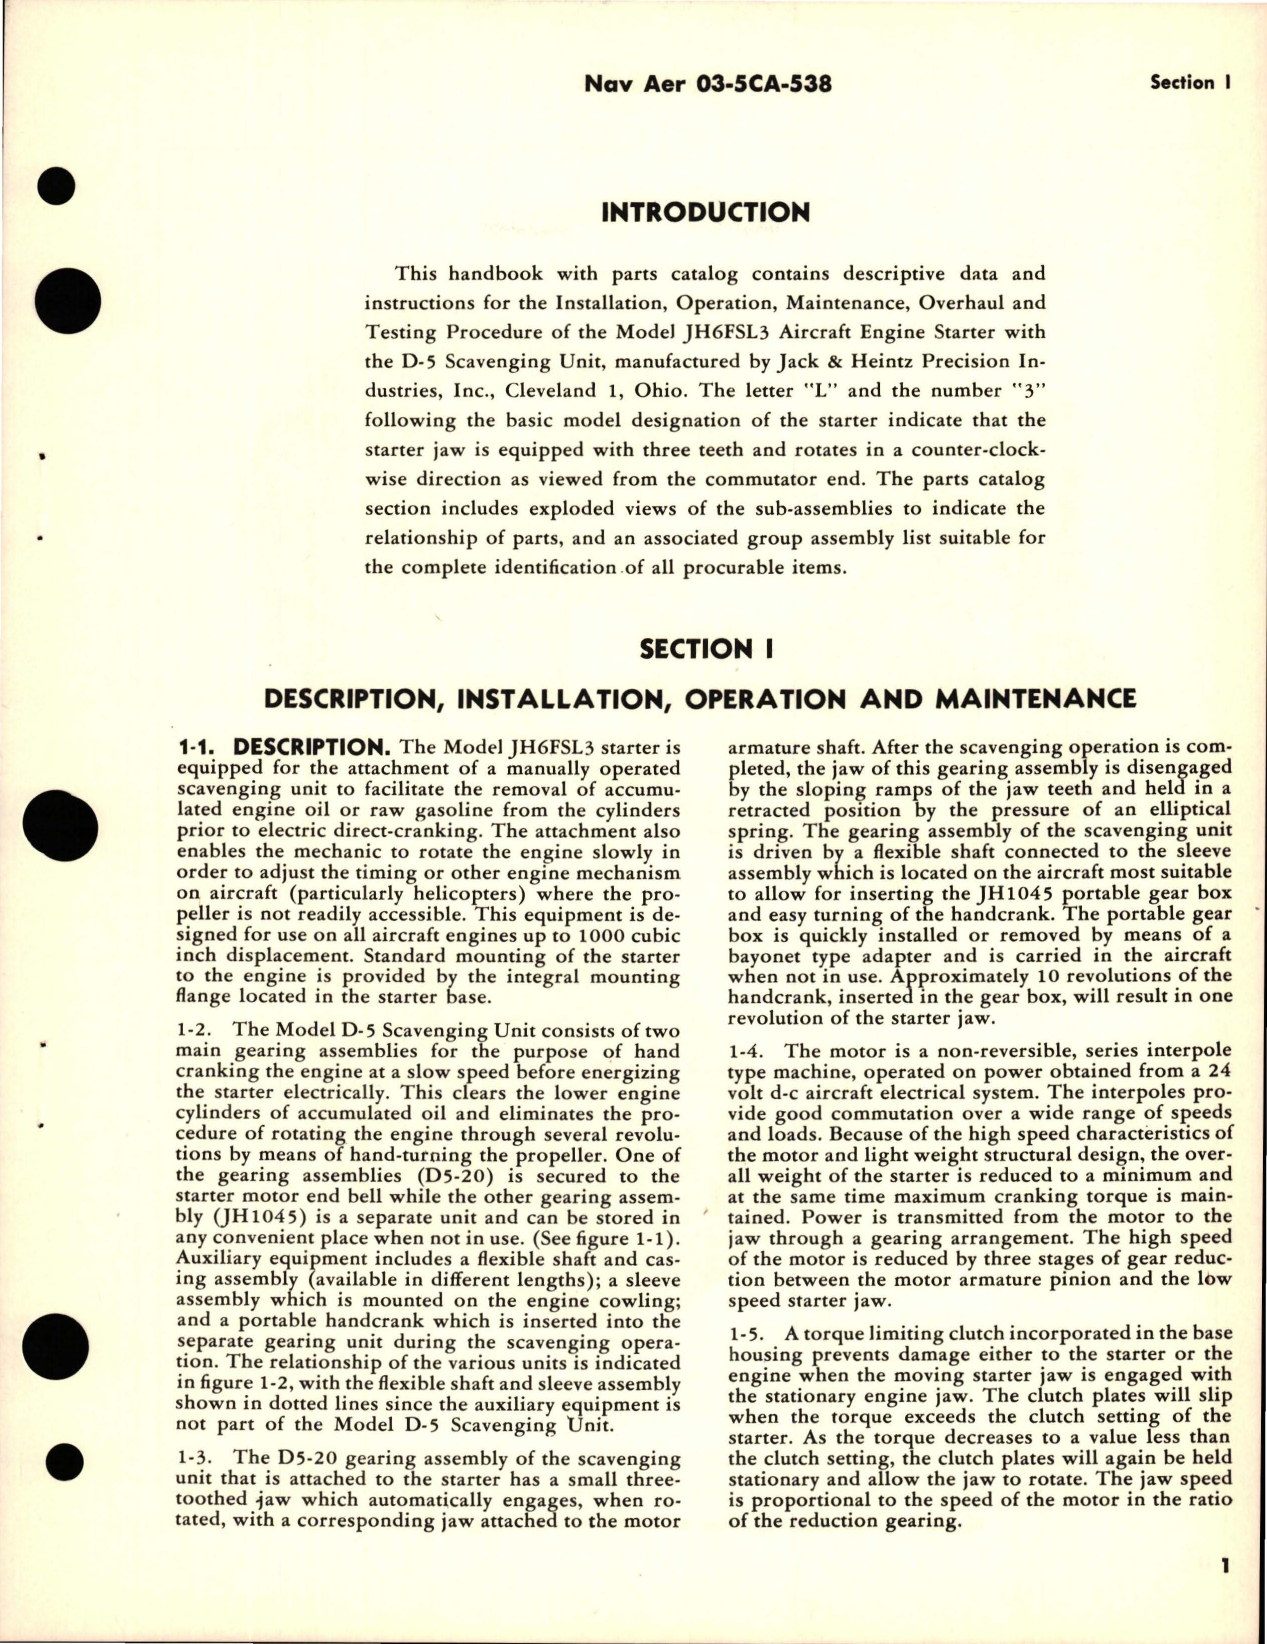 Sample page 5 from AirCorps Library document: Operation, Service, and Overhaul Instructions with Parts Catalog for Starters with Scavenging Unit - Models JH6FSL3, D-5